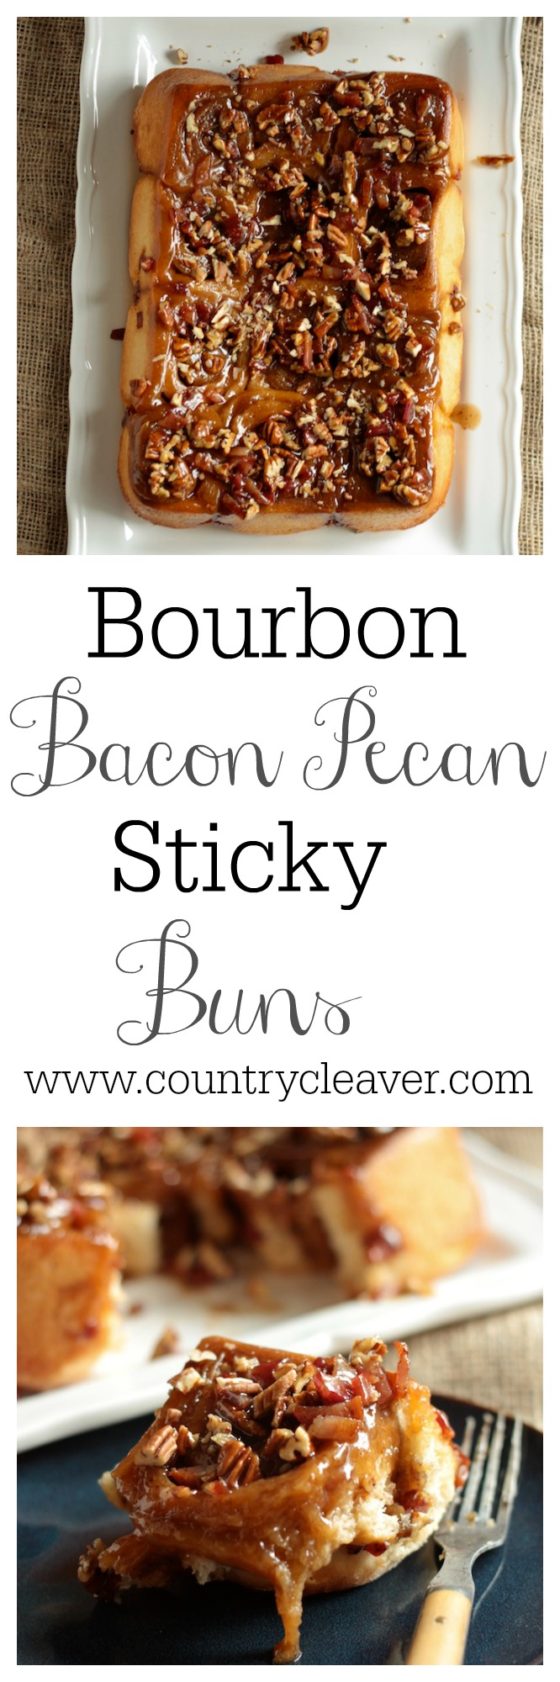 Bourbon Bacon Pecan Sticky Buns- www.countrycleaver.com